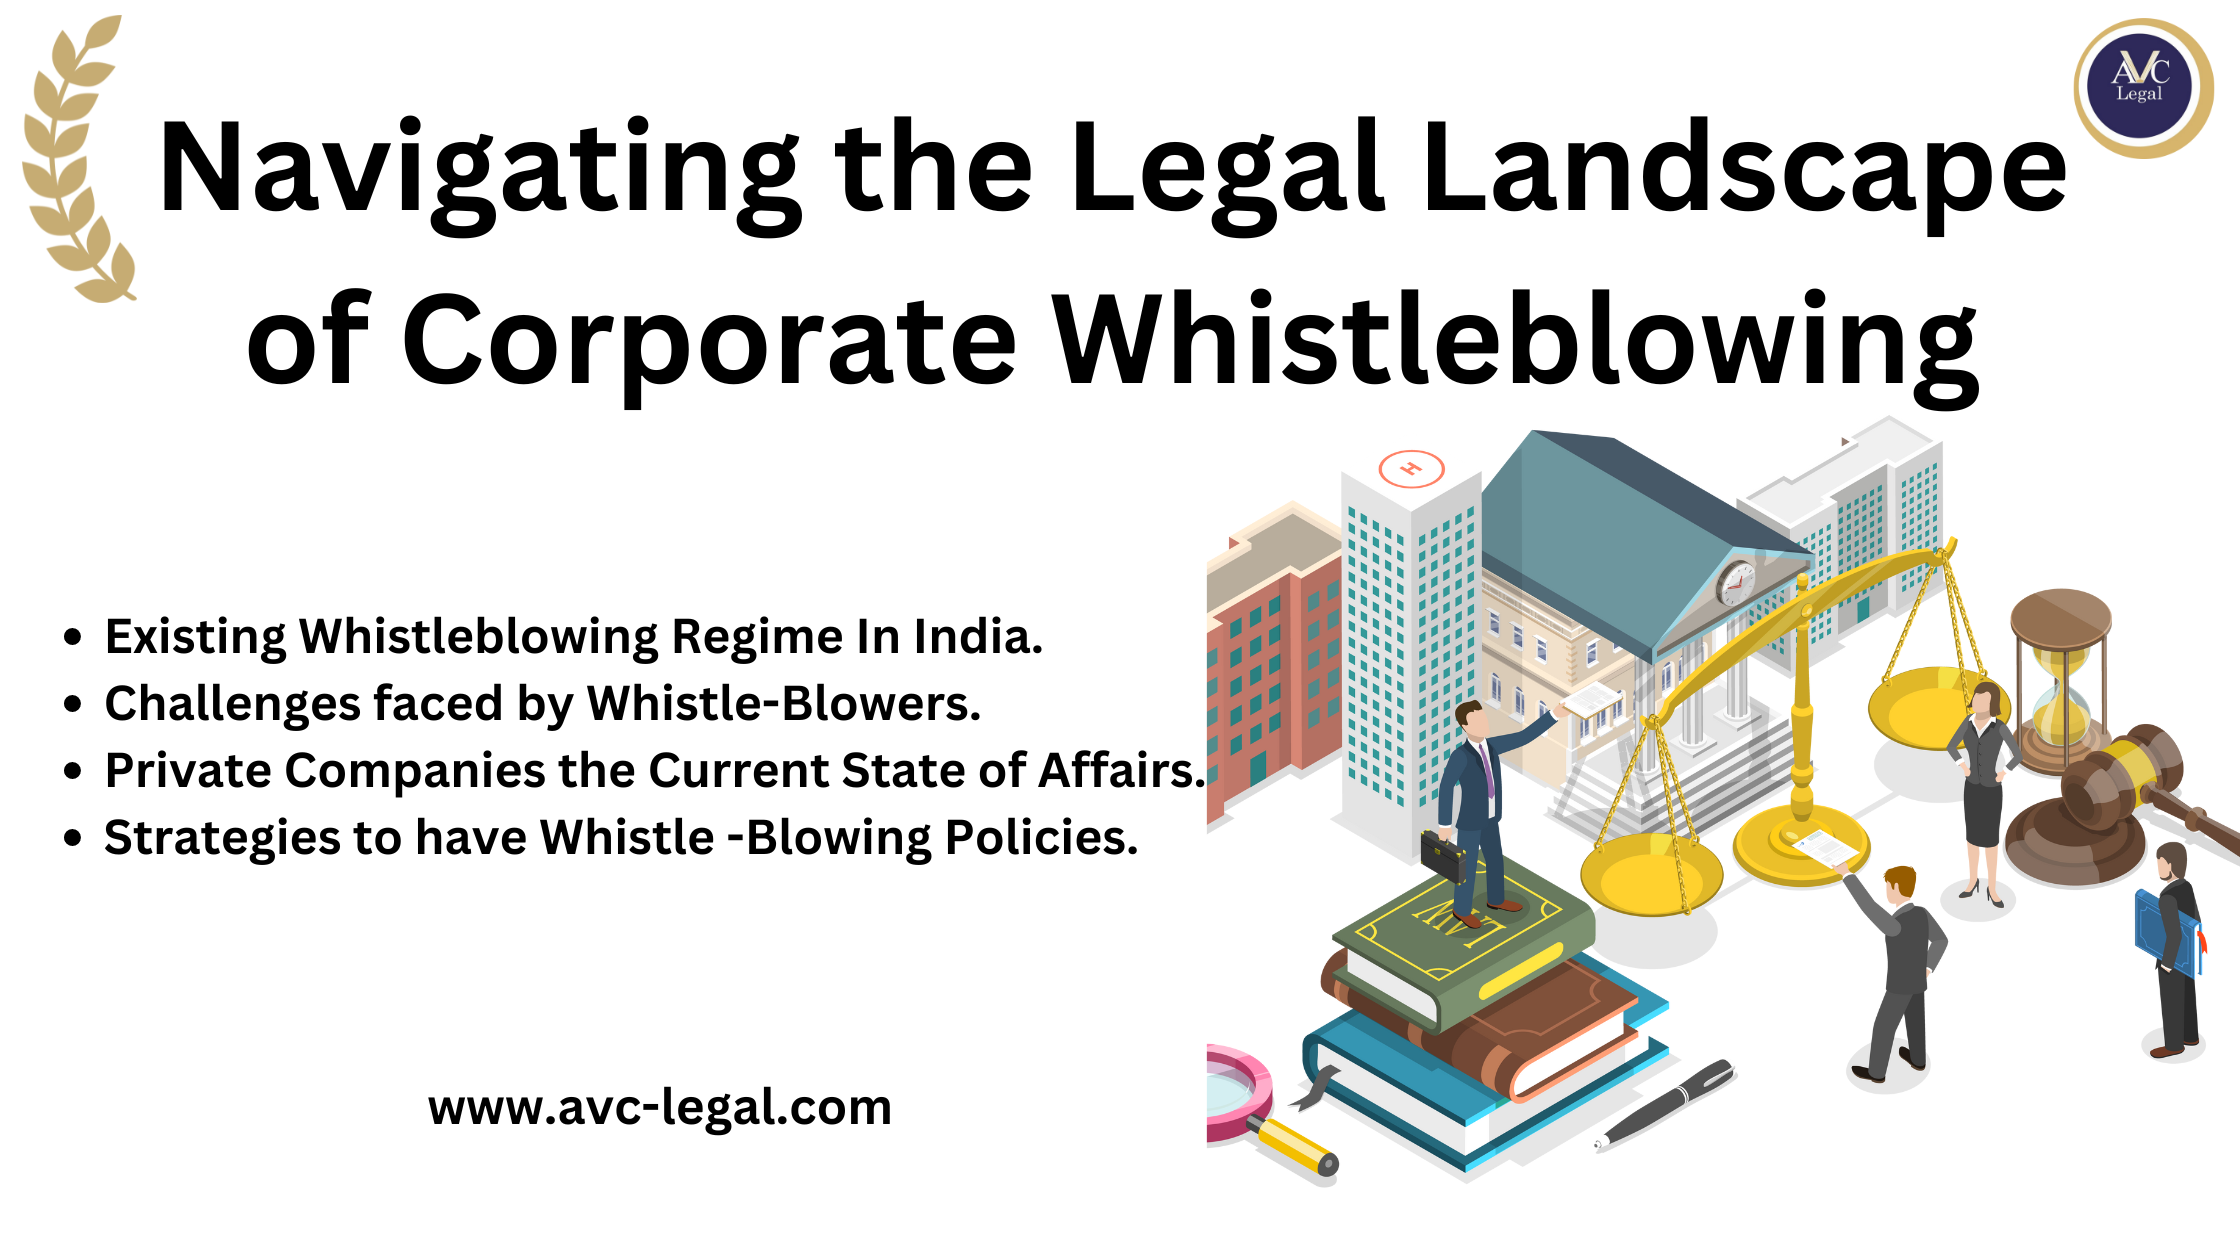 Navigating the Legal Landscape of Corporate Whistleblowing